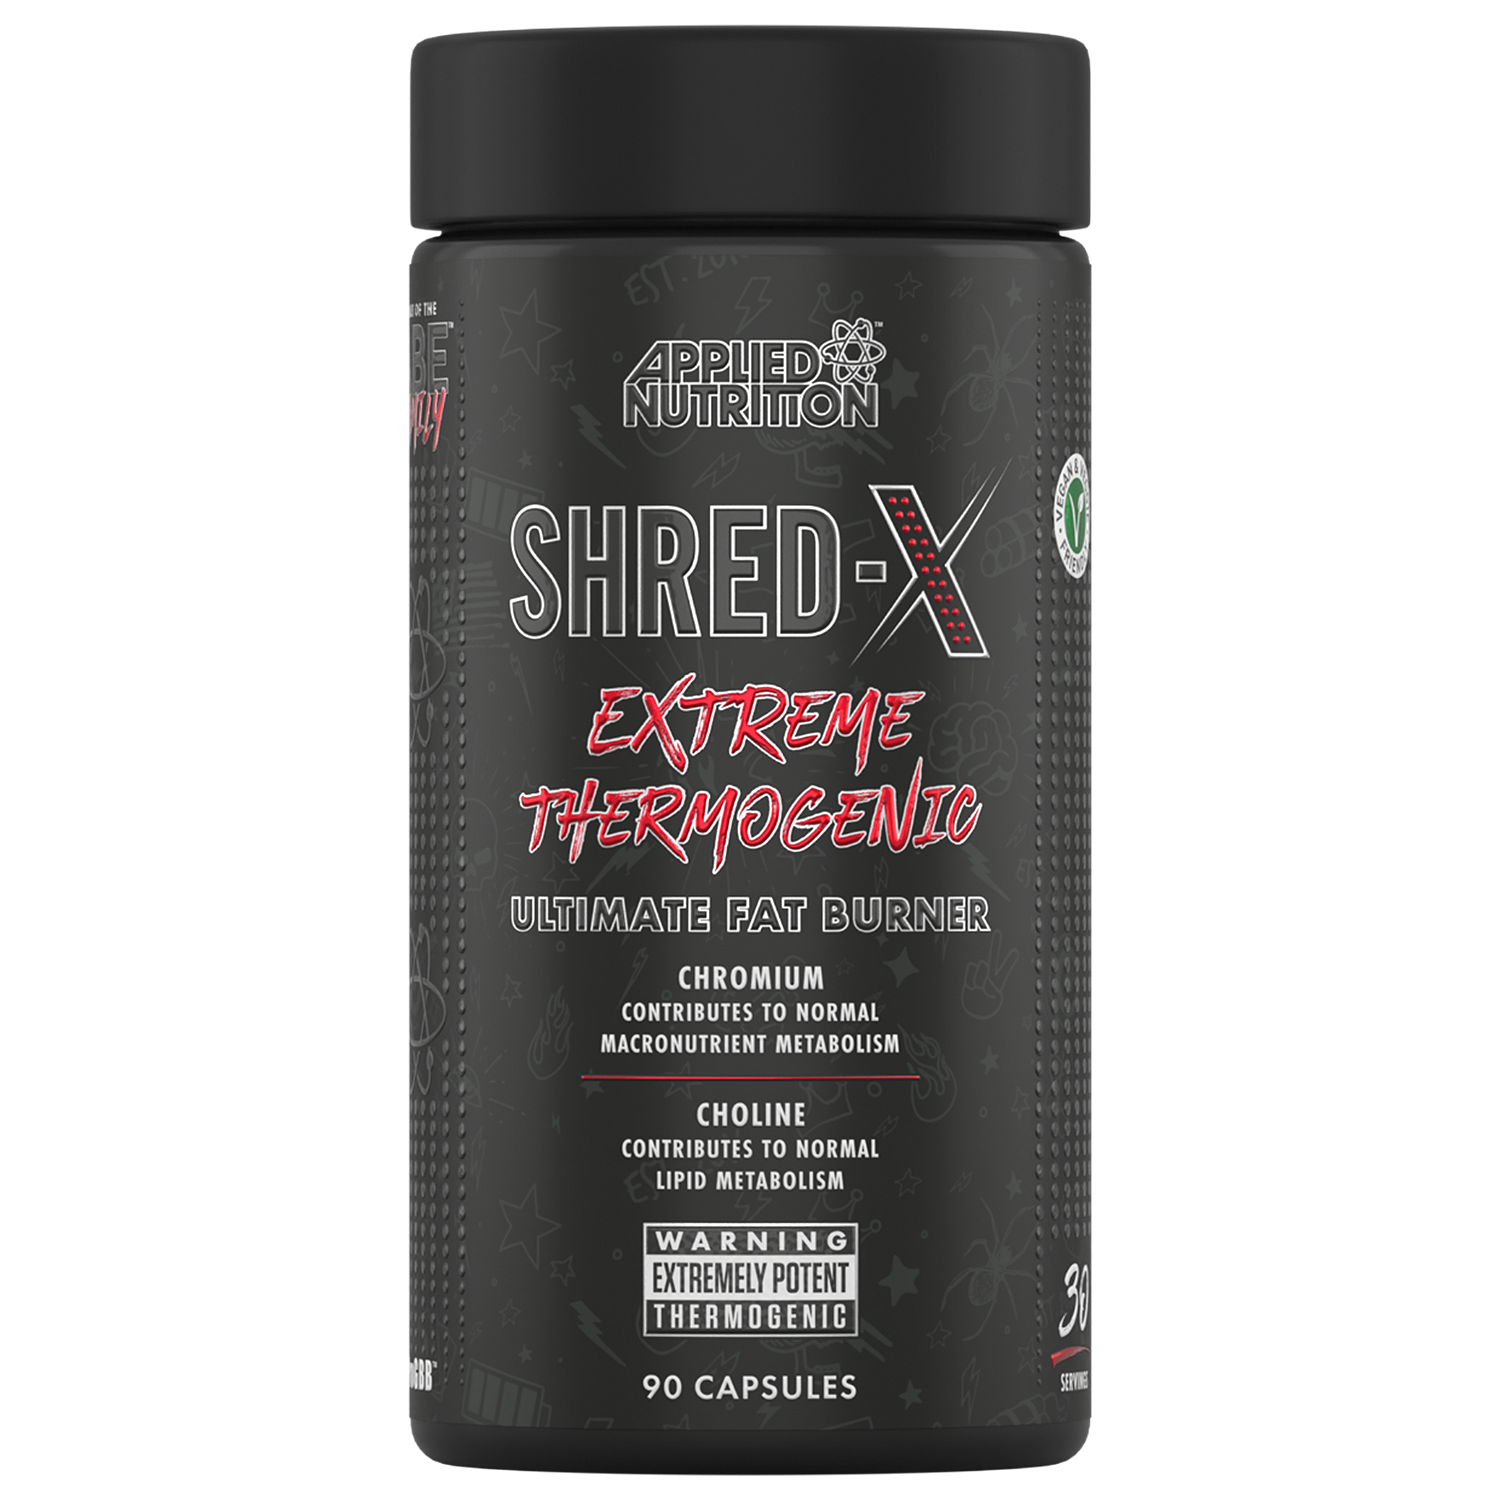 Applied Nutrition Shred X Extreme Thermogenic, 90 Capsules